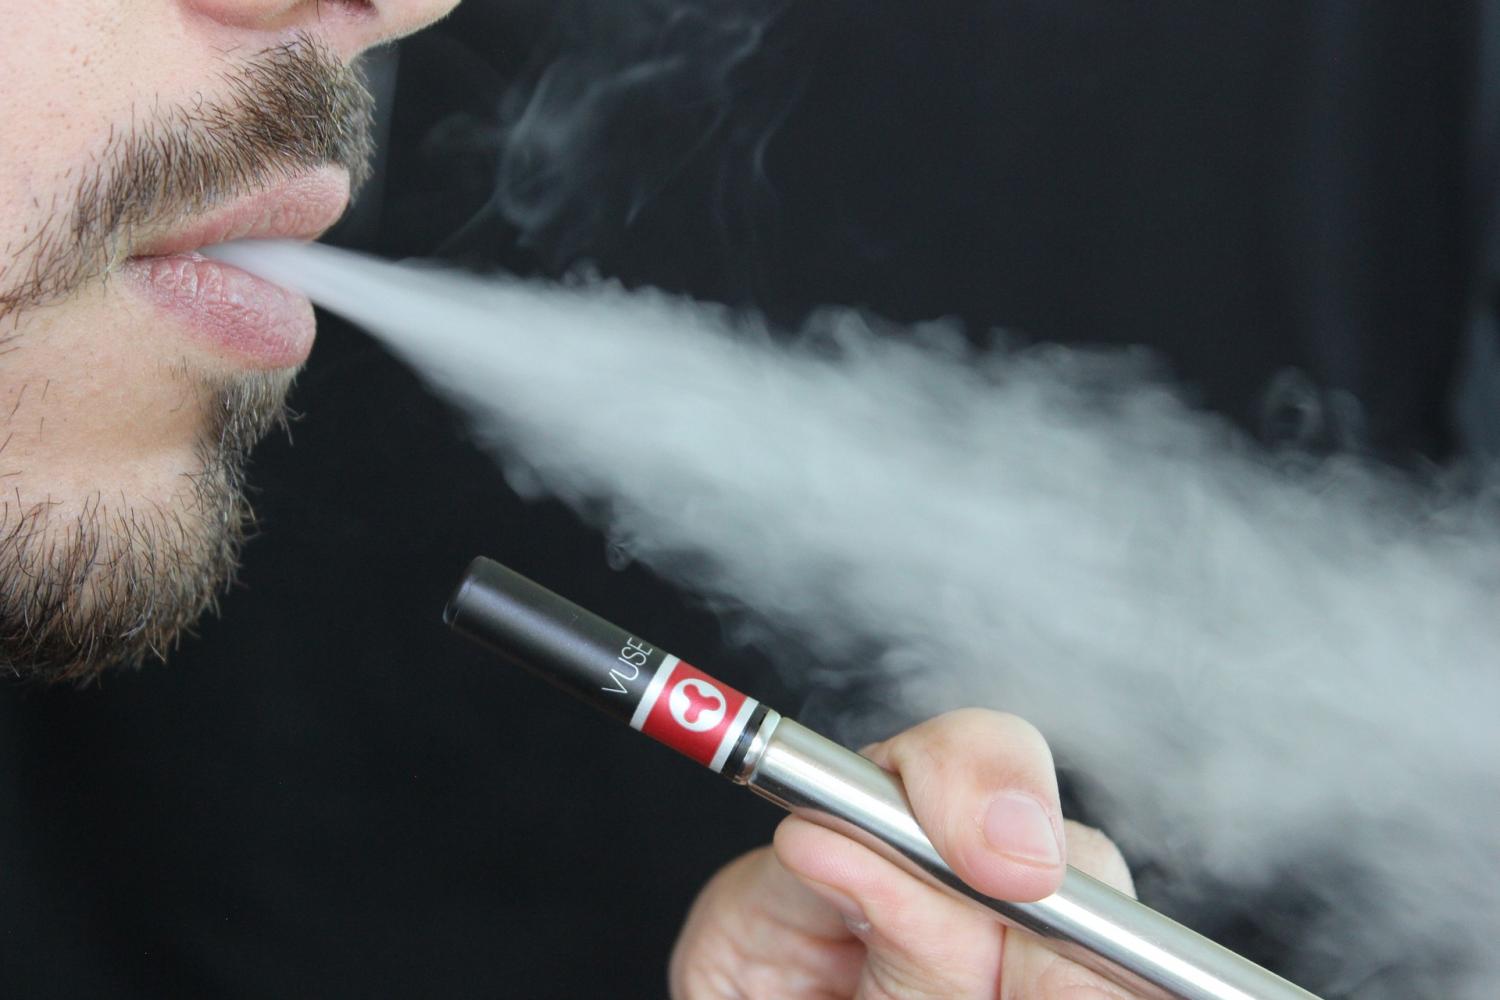 NC Dentists: Vaping Increases Risk of Tooth, Gum Problems